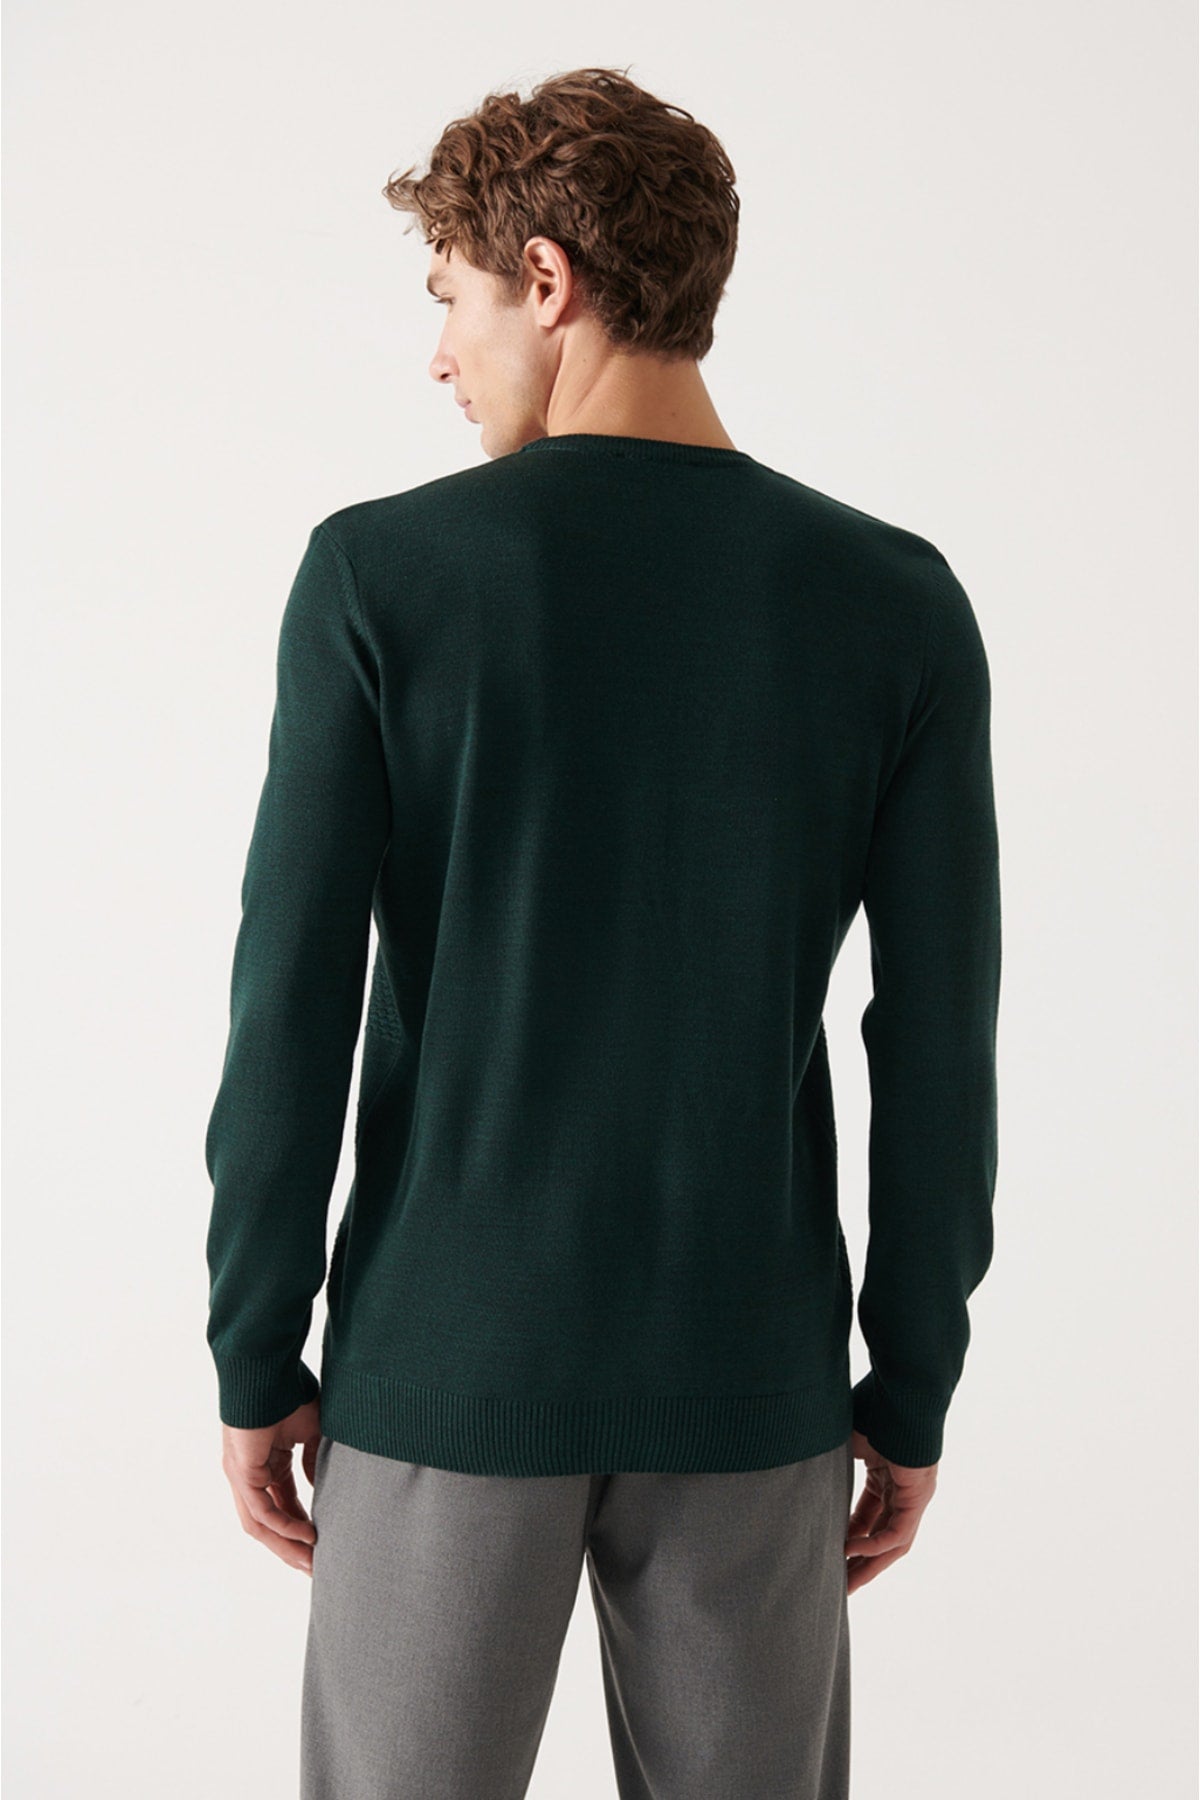 Men's Green Bicycle Neck Honeycomb textured knitwear sweater A22y5073